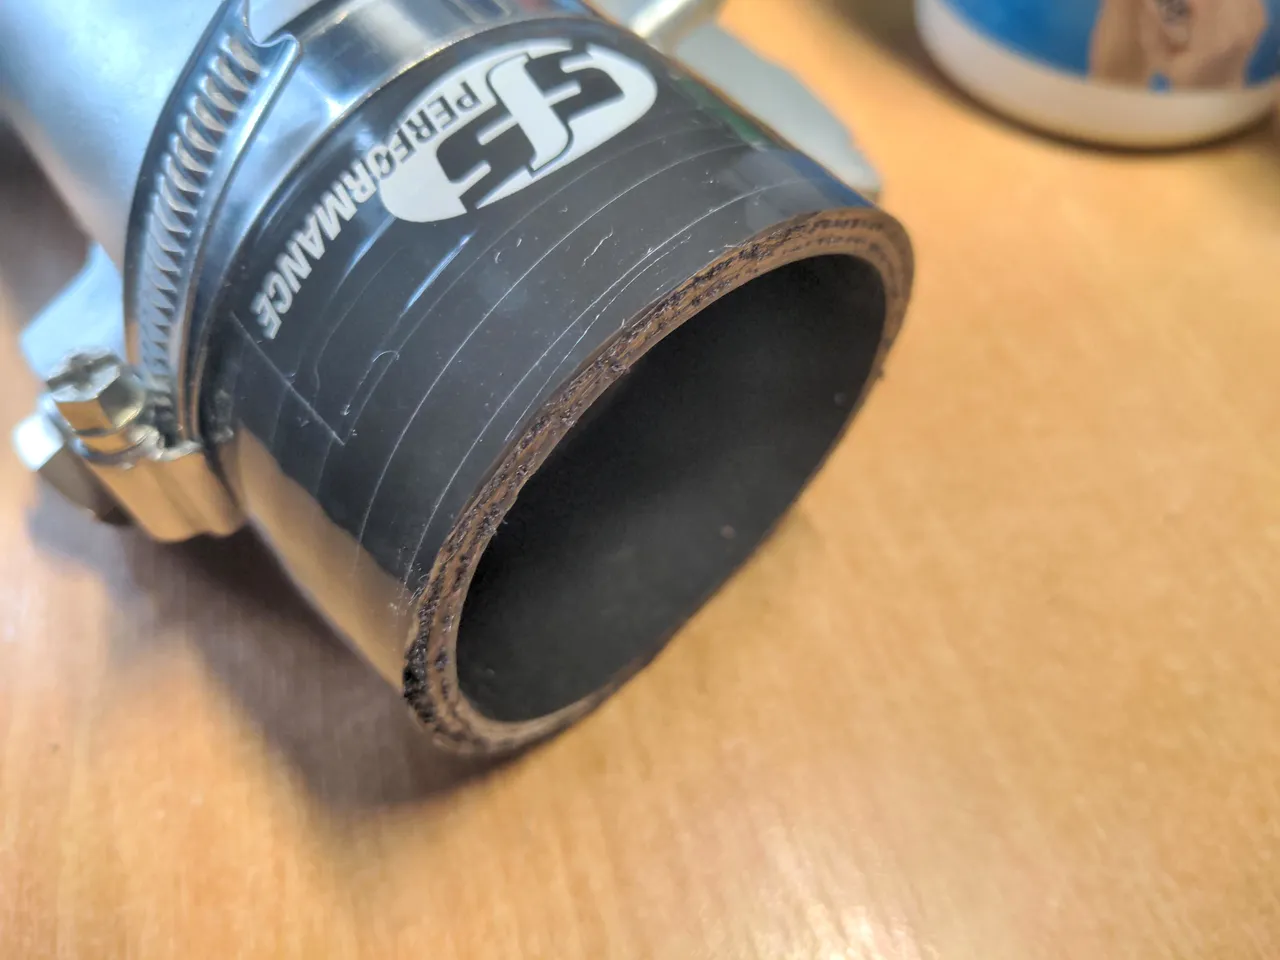 My new coupling hose with a semi-neat cut, and the white polyester strands on the inside drawn over with black permanent ink.